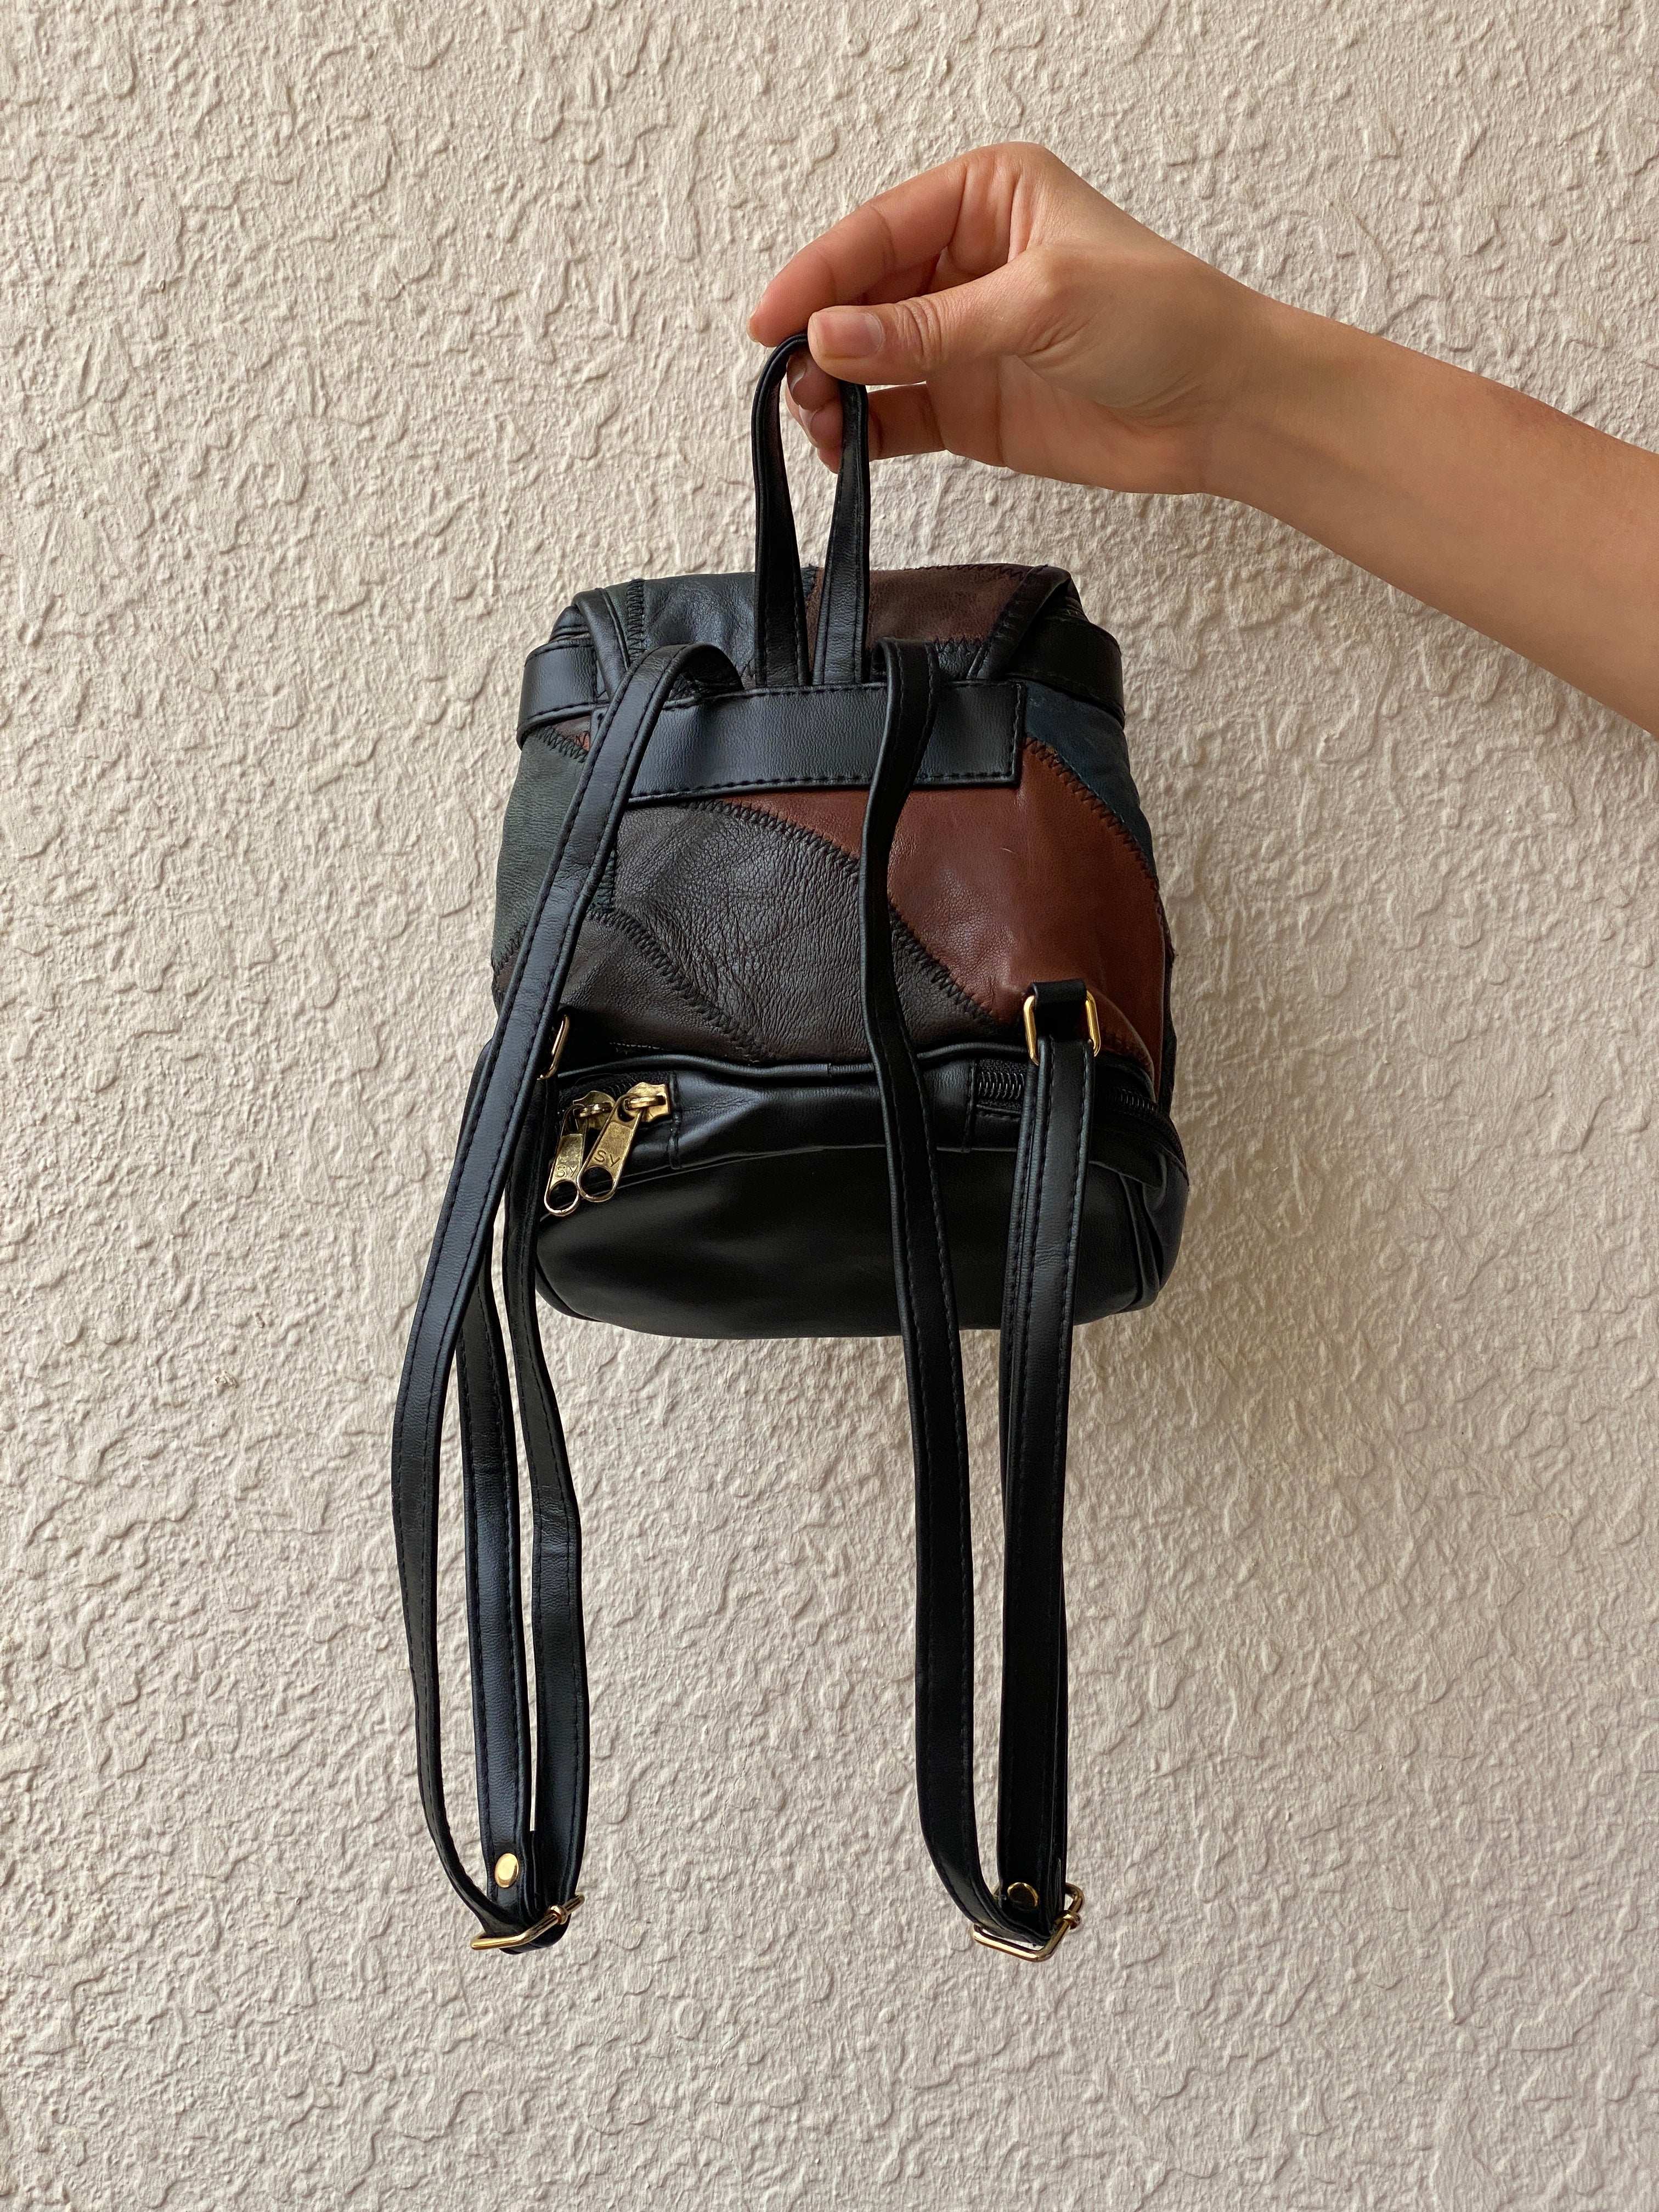 Unique Vintage Genuine Italian Leather Mini Backpack - Balagan Vintage Bags 80s, 90s, bag, NEW IN